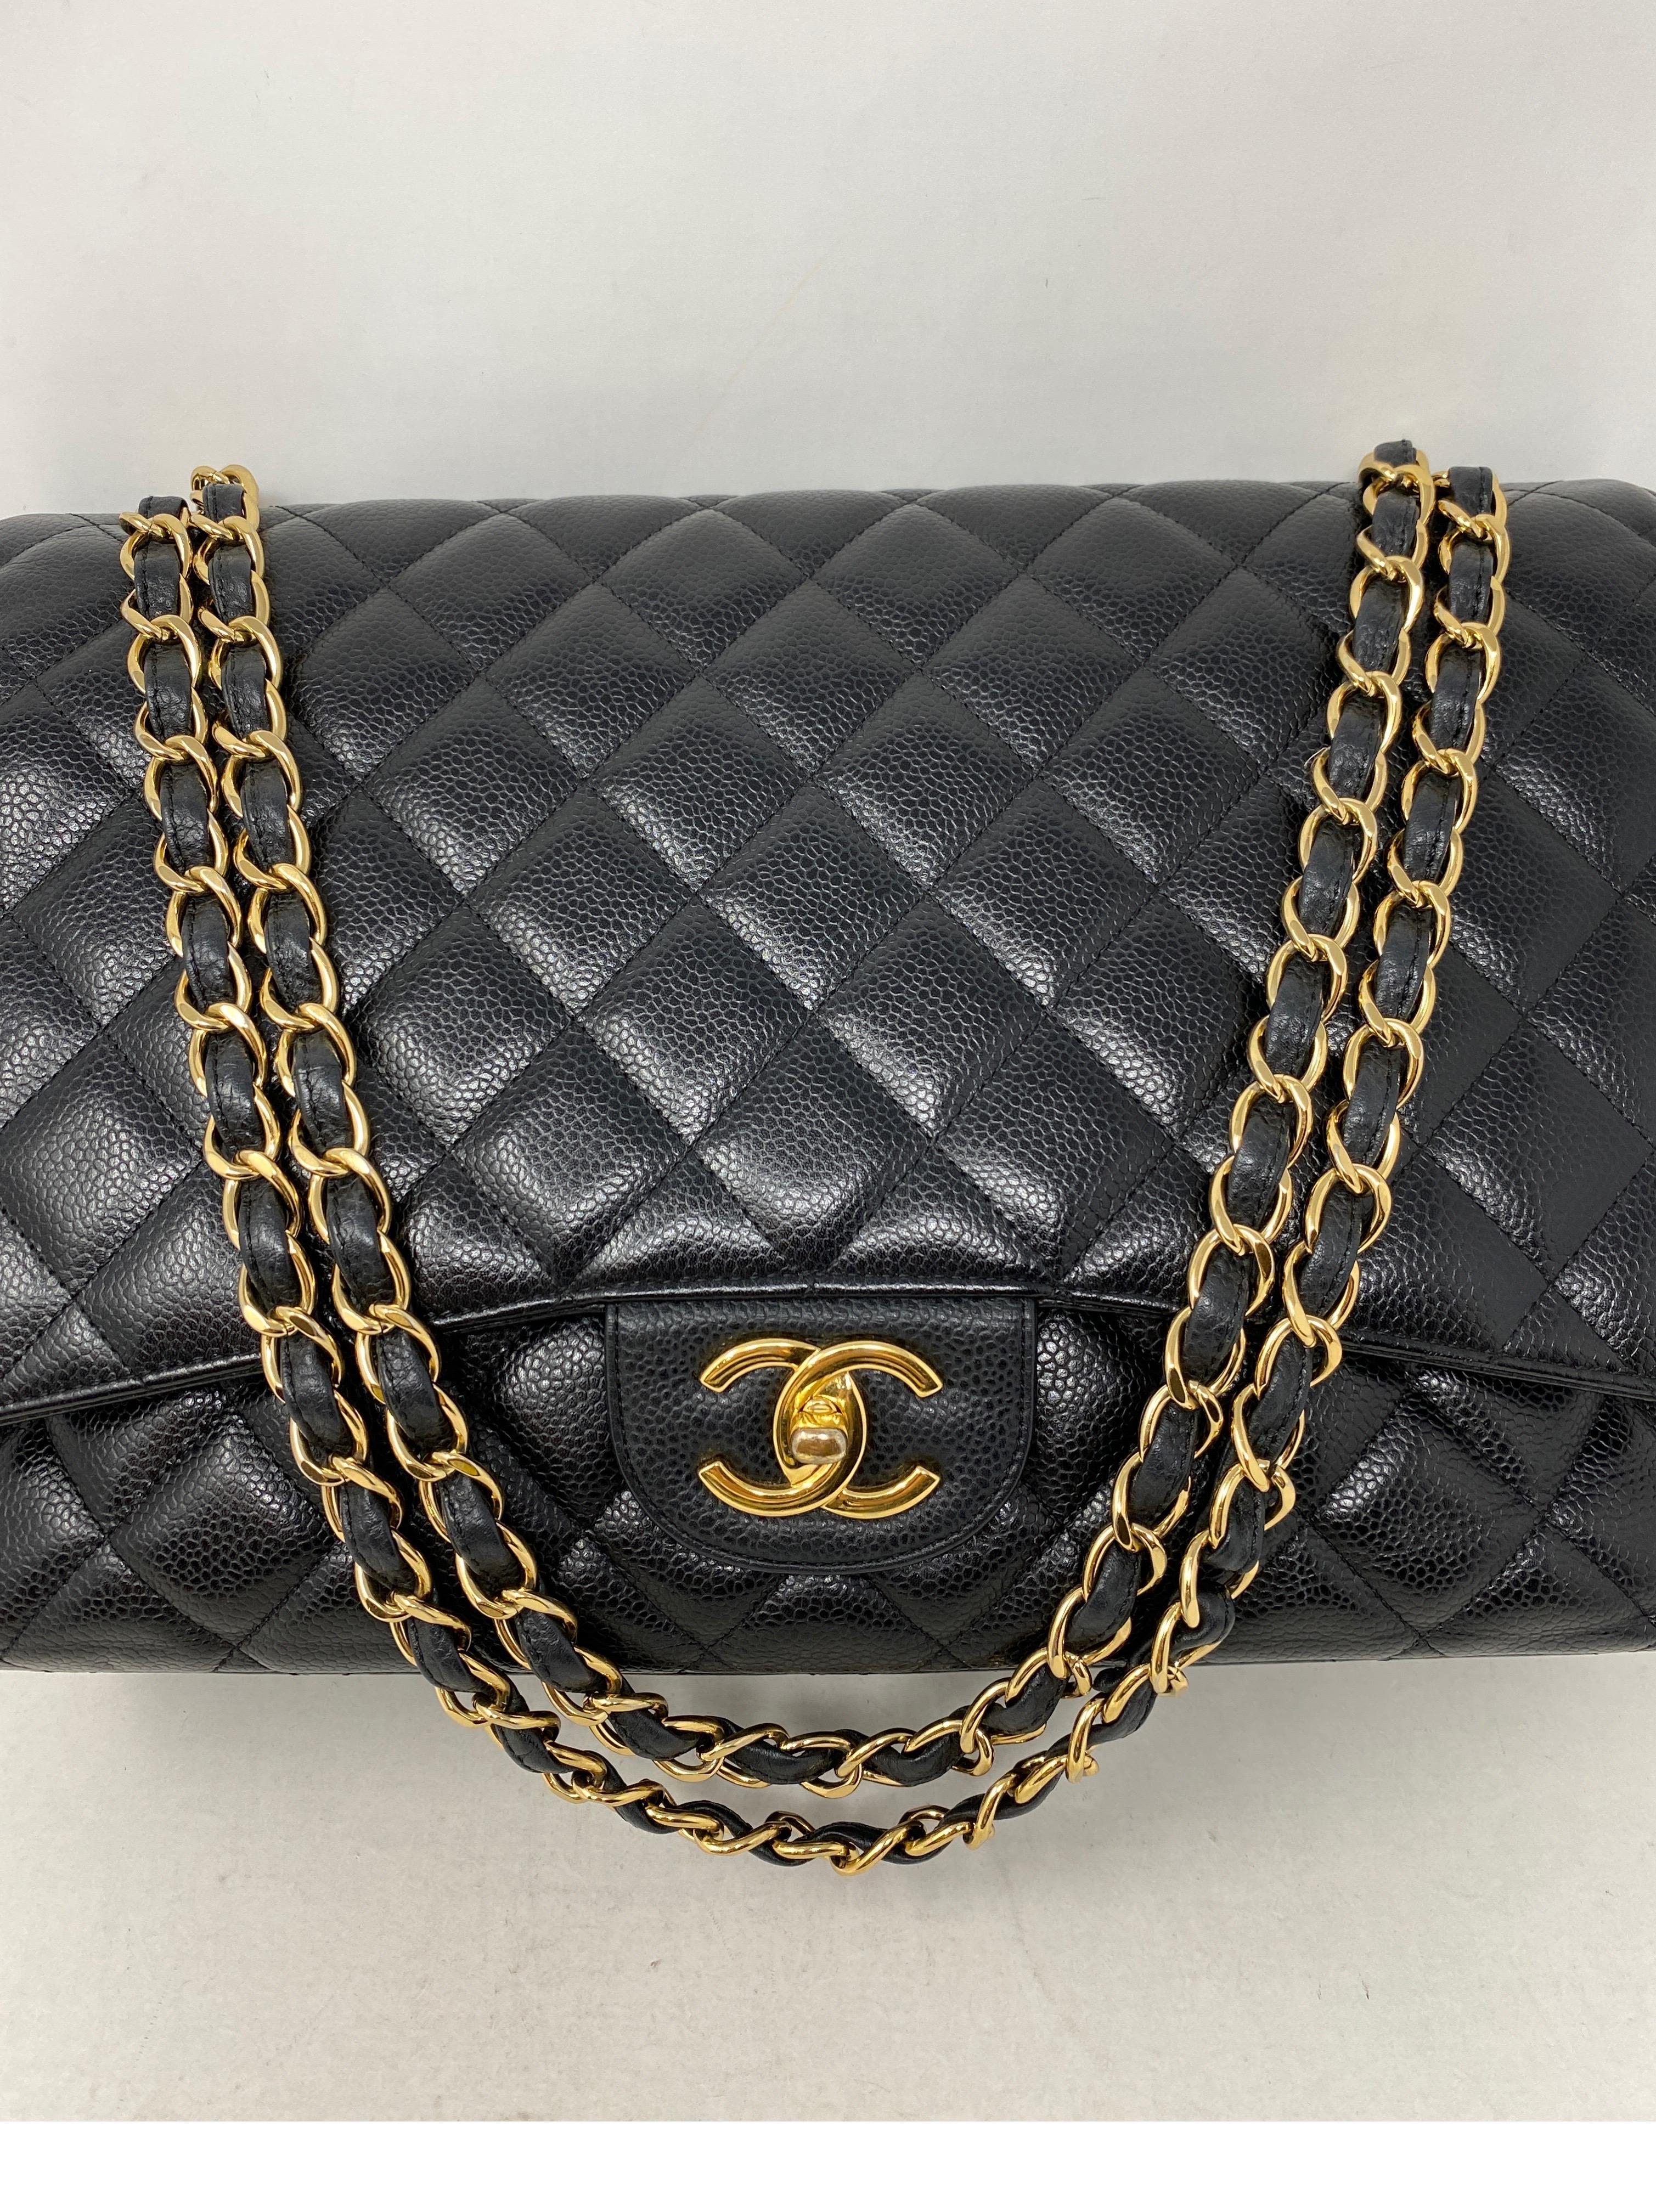 Chanel Black Maxi Double Flap Bag. Caviar leather with gold hardware. Good condition. Light wear on turn lock. Loss of gold plating. Overall good condition. Pricing of Chanel has gone up. Investment bag. Includes authenticity card. Guaranteed